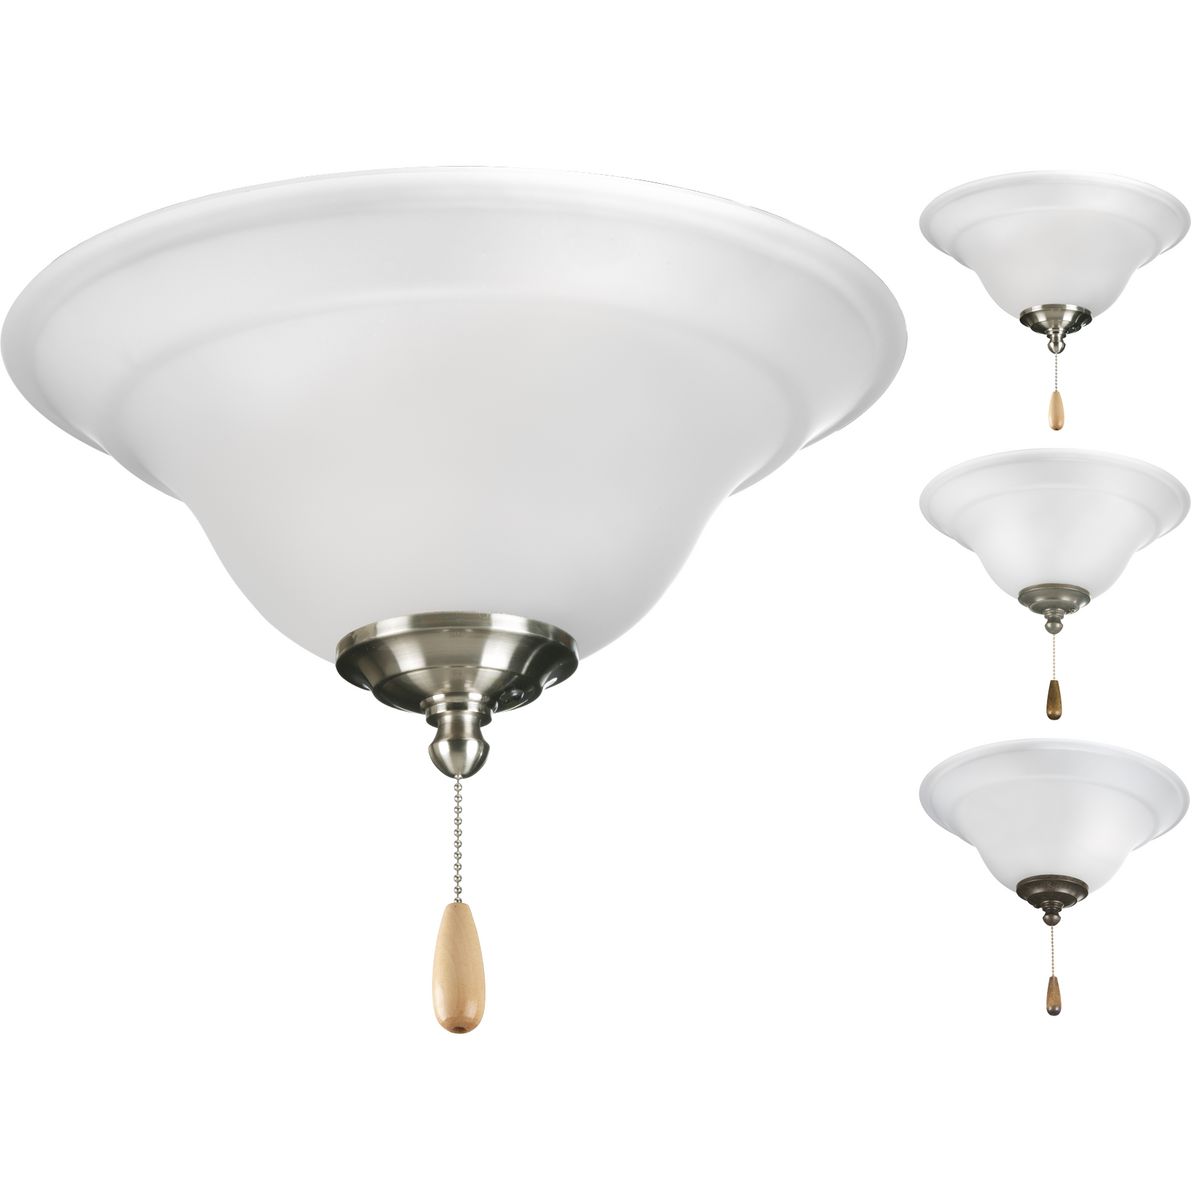 Two-light fan kit with an etched glass bowl from the Trinity Collection. Finials included are -09 Brushed Nickel, -20 Antique Bronze, -30 White and -77 Forged Bronze that match a variety of Progress Lighting fans. Quick-connect wiring makes it easy t...